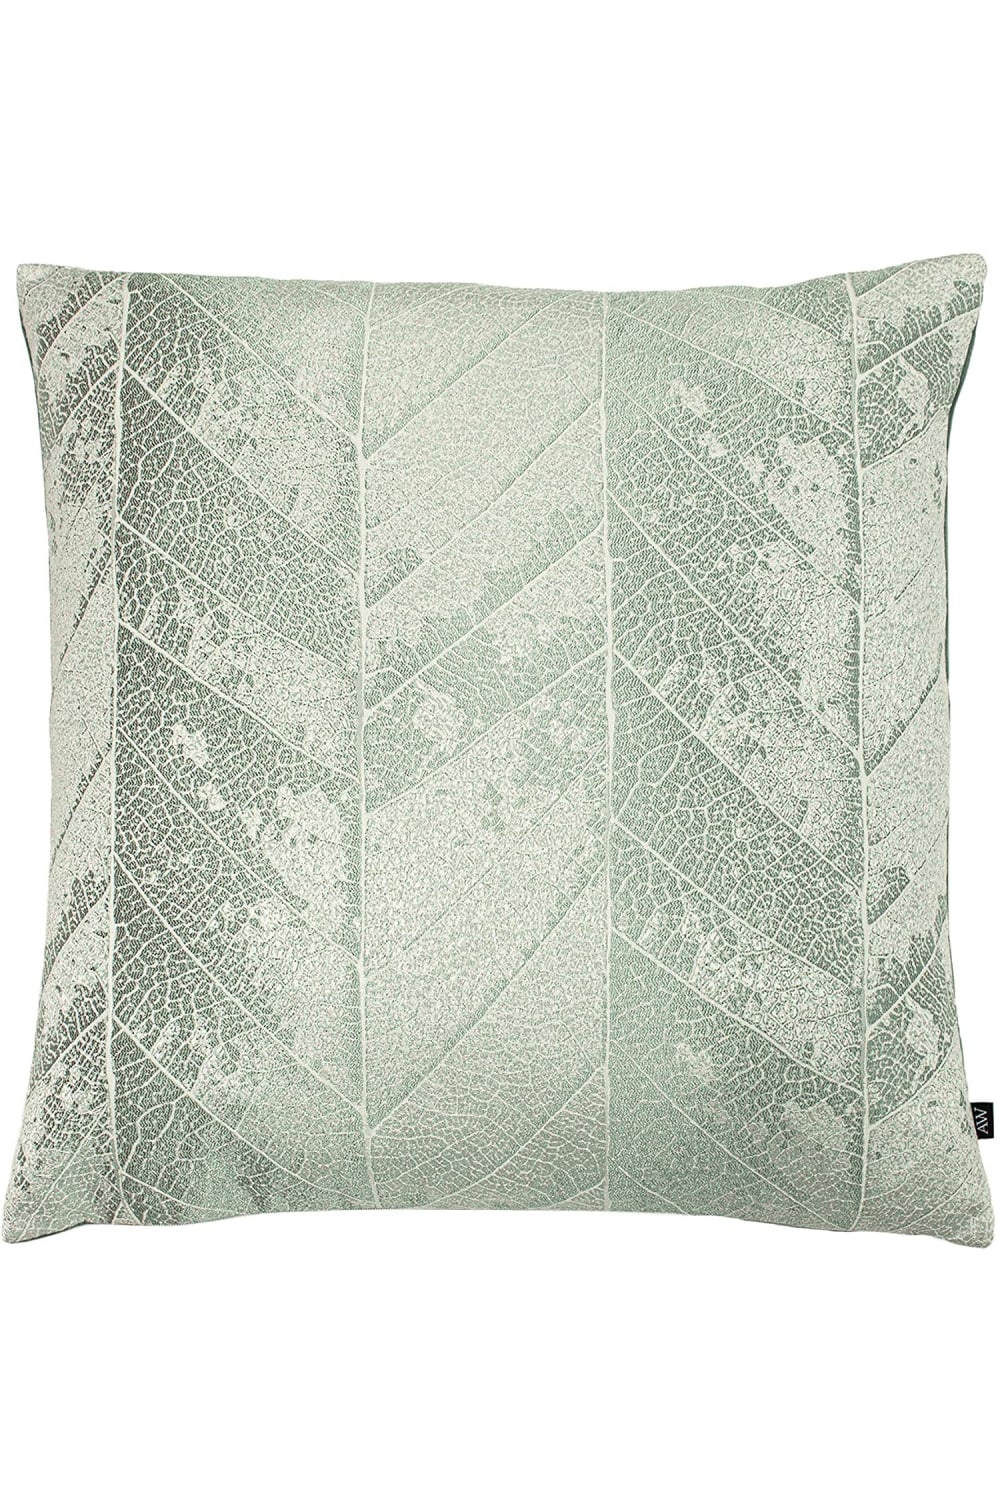 Myall Cushion Cover (One Size)